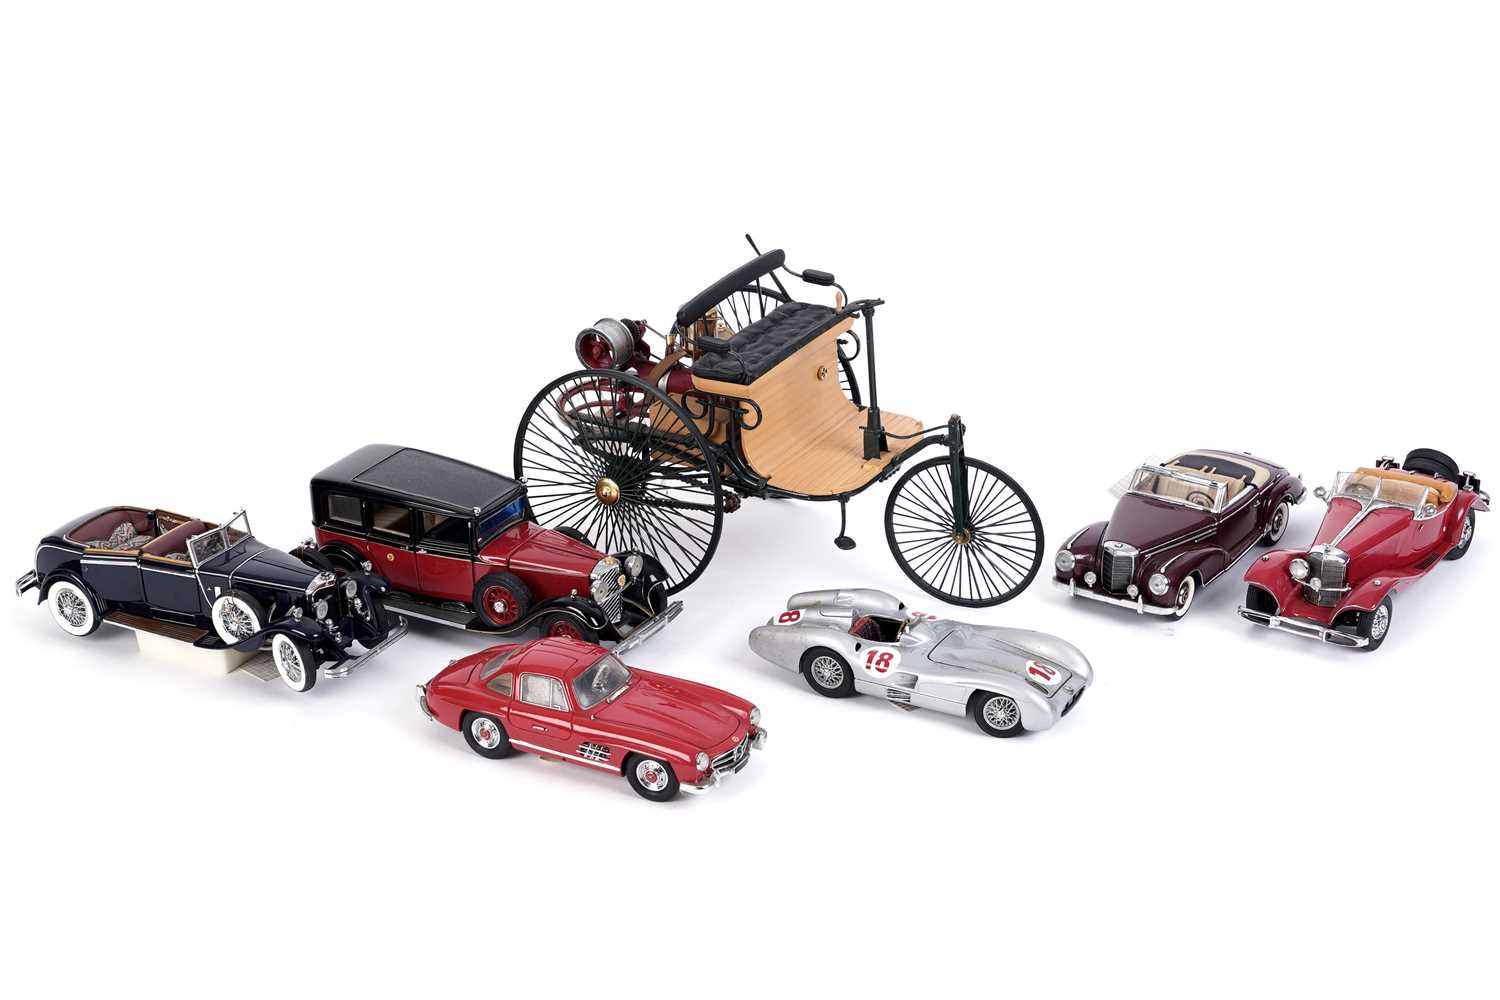 A collection of Franklin Mint diecast model vehicles